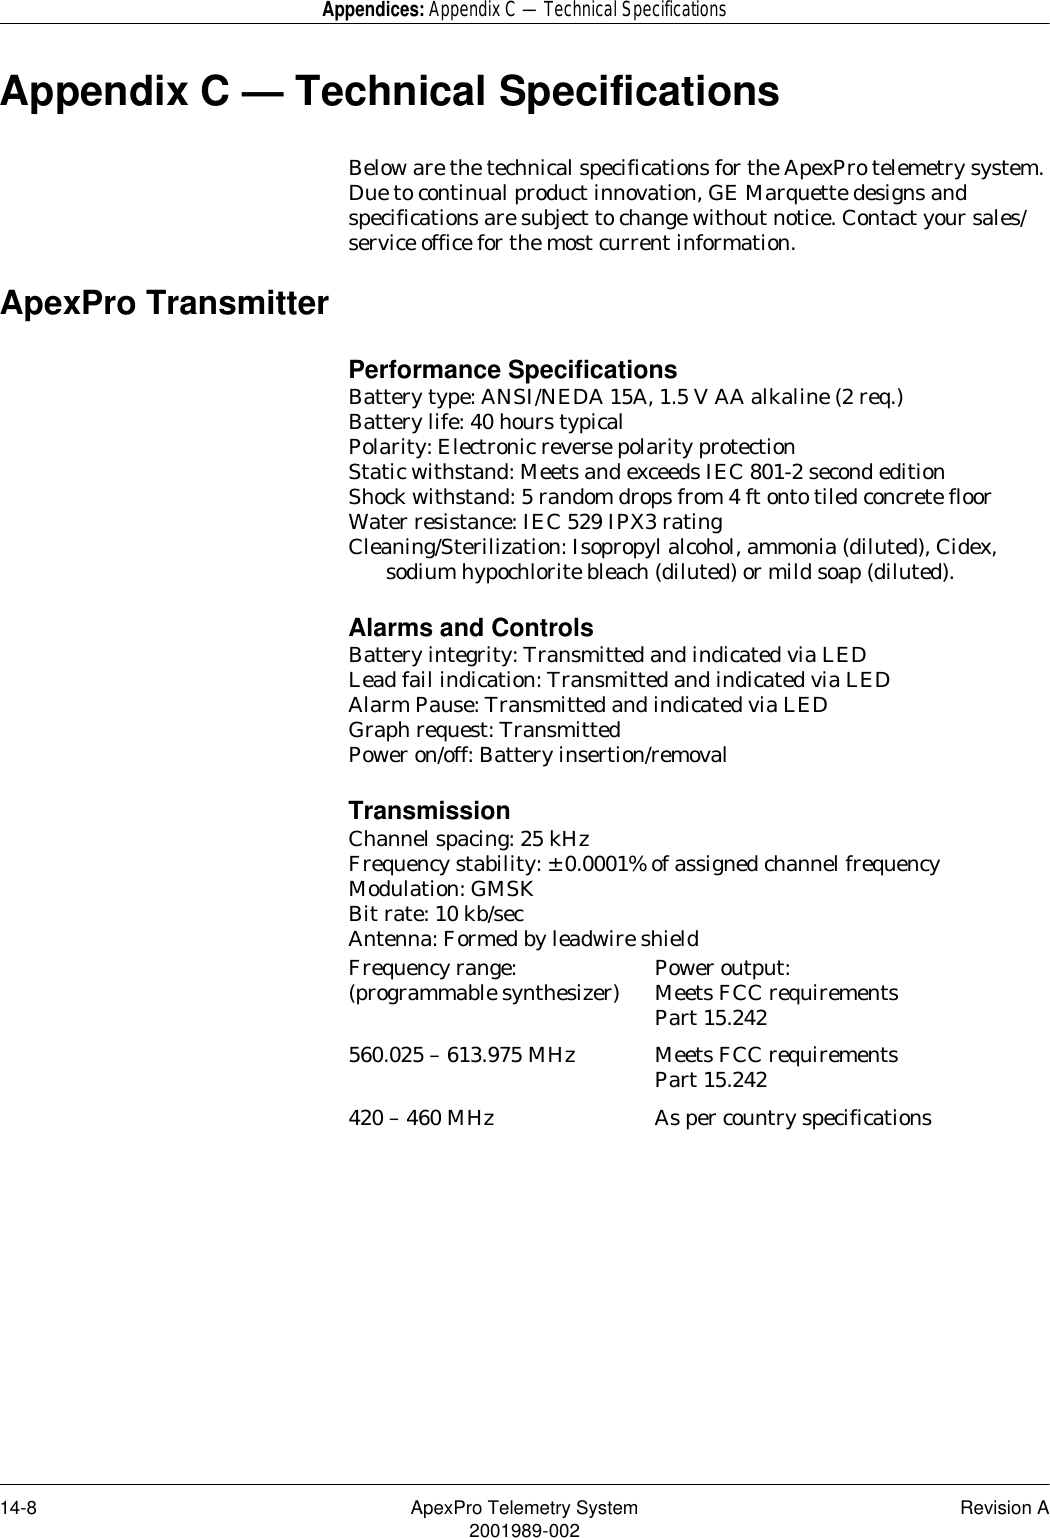 14-8 ApexPro Telemetry System Revision A2001989-002Appendices: Appendix C — Technical SpecificationsAppendix C — Technical SpecificationsBelow are the technical specifications for the ApexPro telemetry system. Due to continual product innovation, GE Marquette designs and specifications are subject to change without notice. Contact your sales/service office for the most current information.ApexPro TransmitterPerformance SpecificationsBattery type: ANSI/NEDA 15A, 1.5 V AA alkaline (2 req.)Battery life: 40 hours typicalPolarity: Electronic reverse polarity protectionStatic withstand: Meets and exceeds IEC 801-2 second editionShock withstand: 5 random drops from 4 ft onto tiled concrete floorWater resistance: IEC 529 IPX3 ratingCleaning/Sterilization: Isopropyl alcohol, ammonia (diluted), Cidex, sodium hypochlorite bleach (diluted) or mild soap (diluted).Alarms and ControlsBattery integrity: Transmitted and indicated via LEDLead fail indication: Transmitted and indicated via LEDAlarm Pause: Transmitted and indicated via LEDGraph request: TransmittedPower on/off: Battery insertion/removalTransmissionChannel spacing: 25 kHzFrequency stability: ± 0.0001% of assigned channel frequencyModulation: GMSKBit rate: 10 kb/secAntenna: Formed by leadwire shieldFrequency range:(programmable synthesizer) Power output:Meets FCC requirements Part 15.242560.025 – 613.975 MHz Meets FCC requirementsPart 15.242420 – 460 MHz As per country specifications